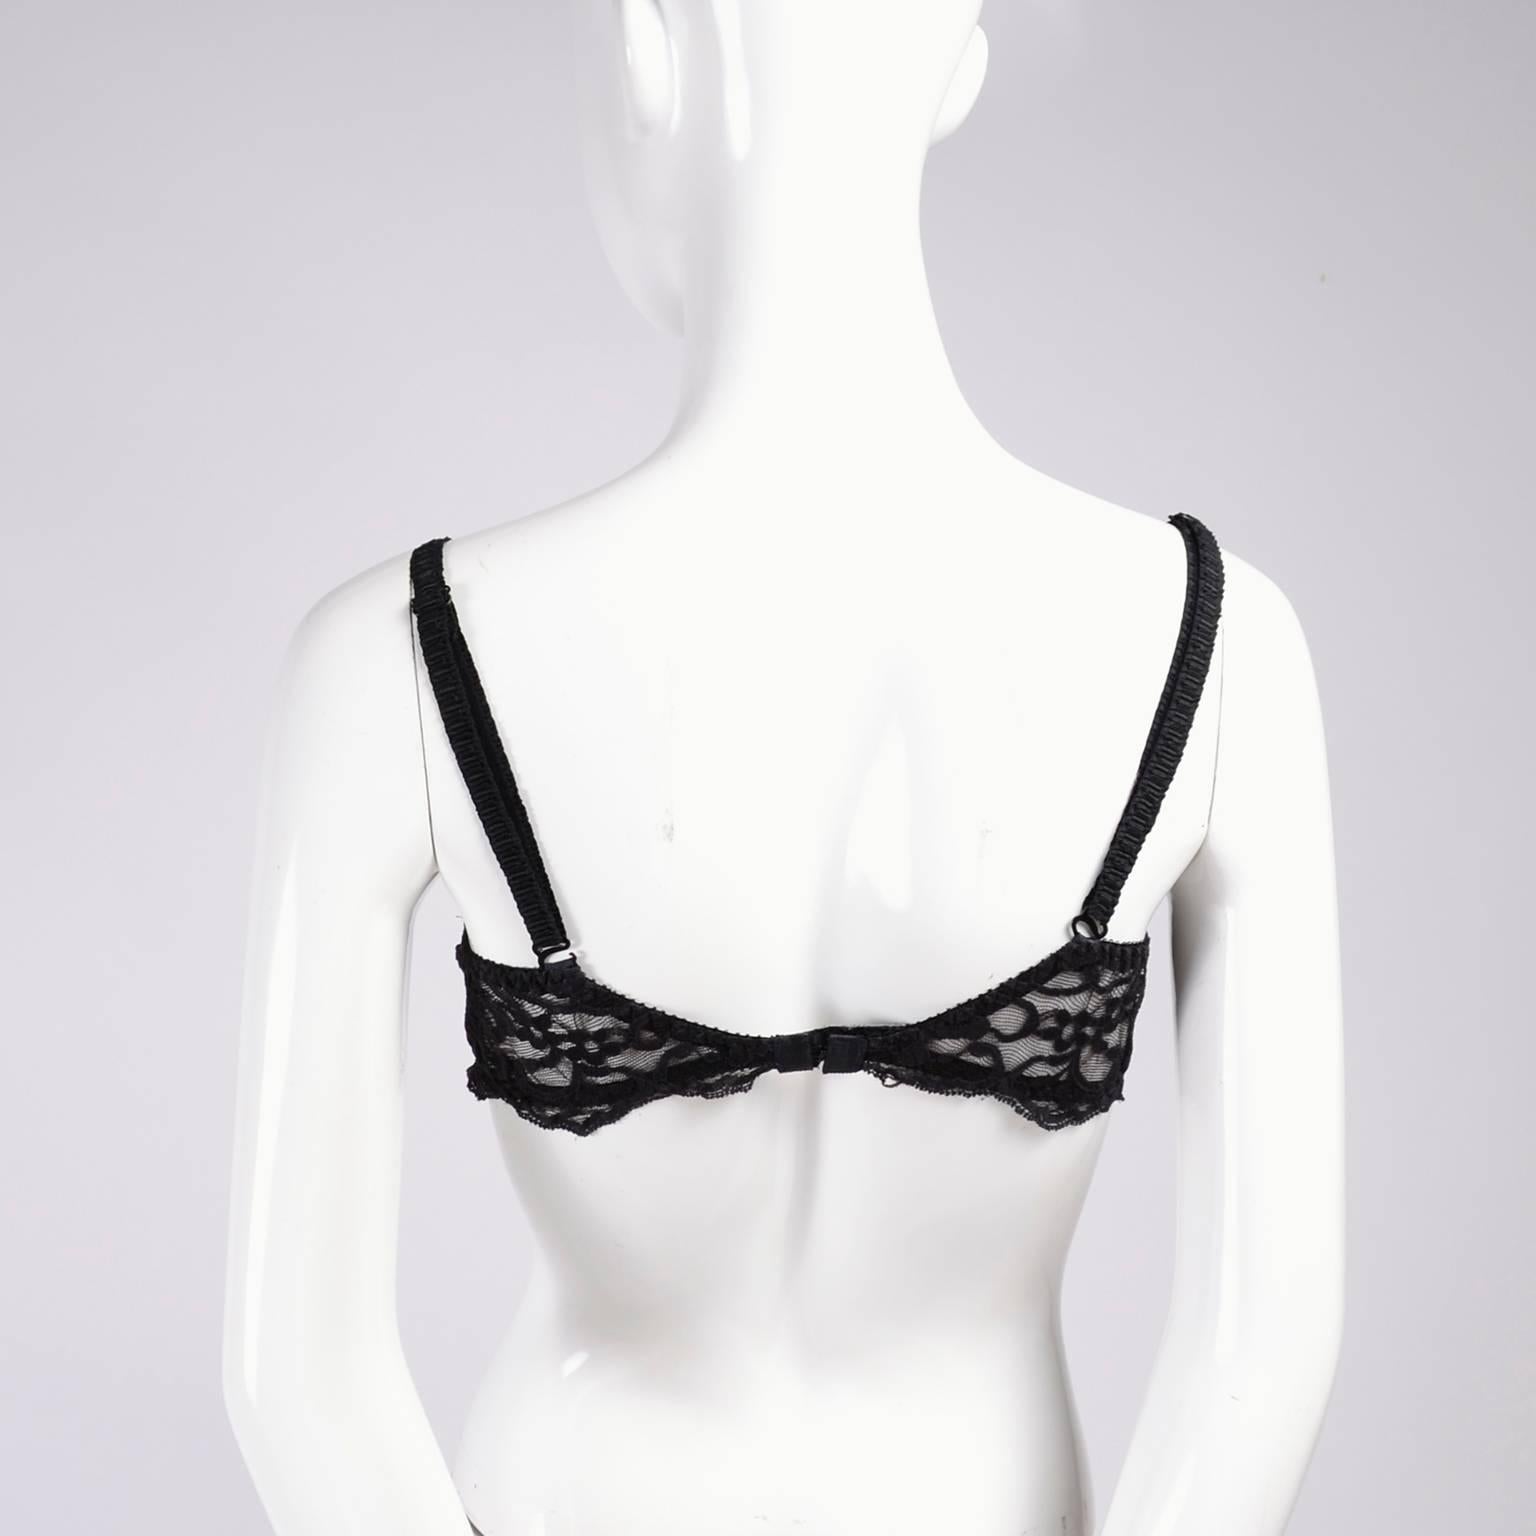 Women's Cher Owned Black Underwire Lace Bra W Photograph of Cher in it  From Collector